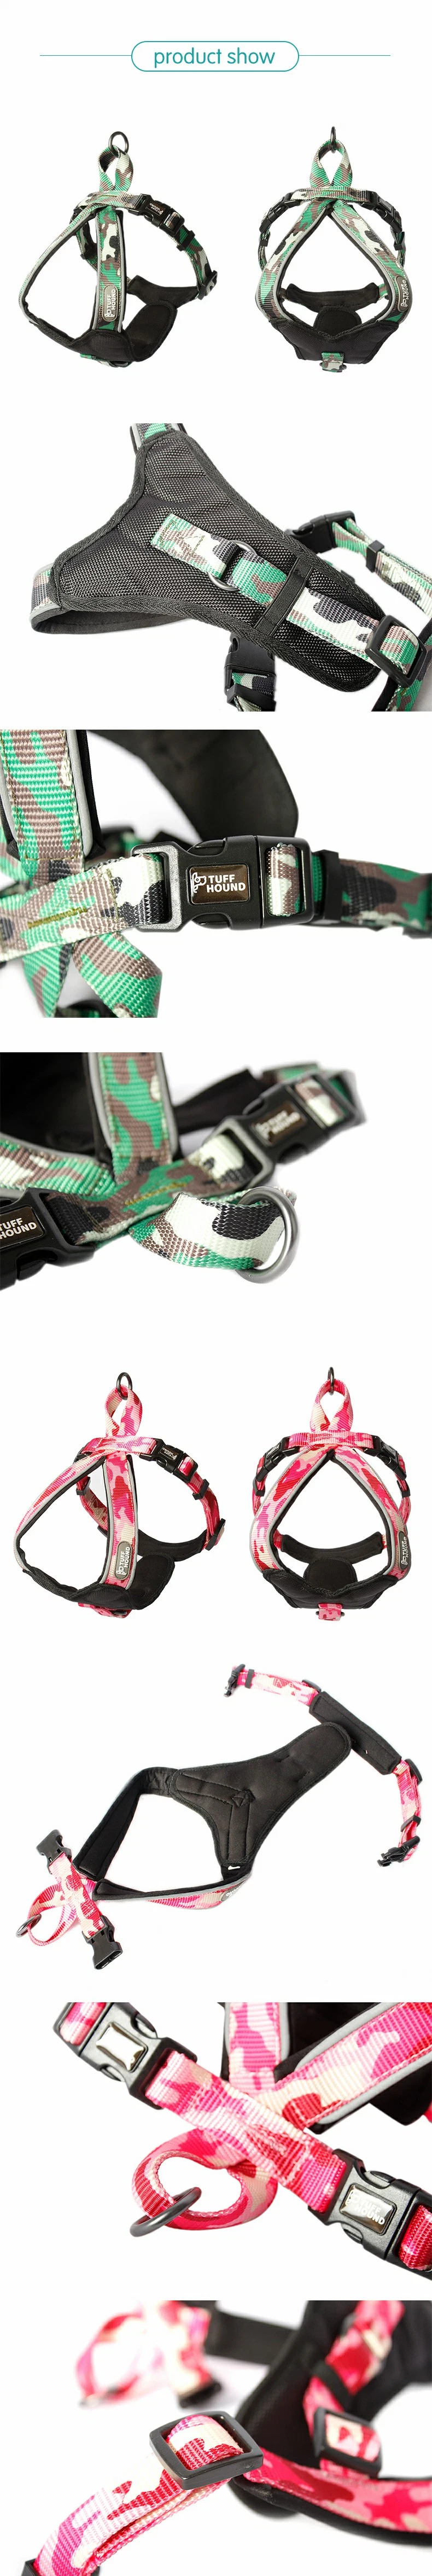 Products Supply Accessories Training Leads Unique Design Polyester Dog Collar Dog Pet Supplies Dog Products Accessories Supply Harness